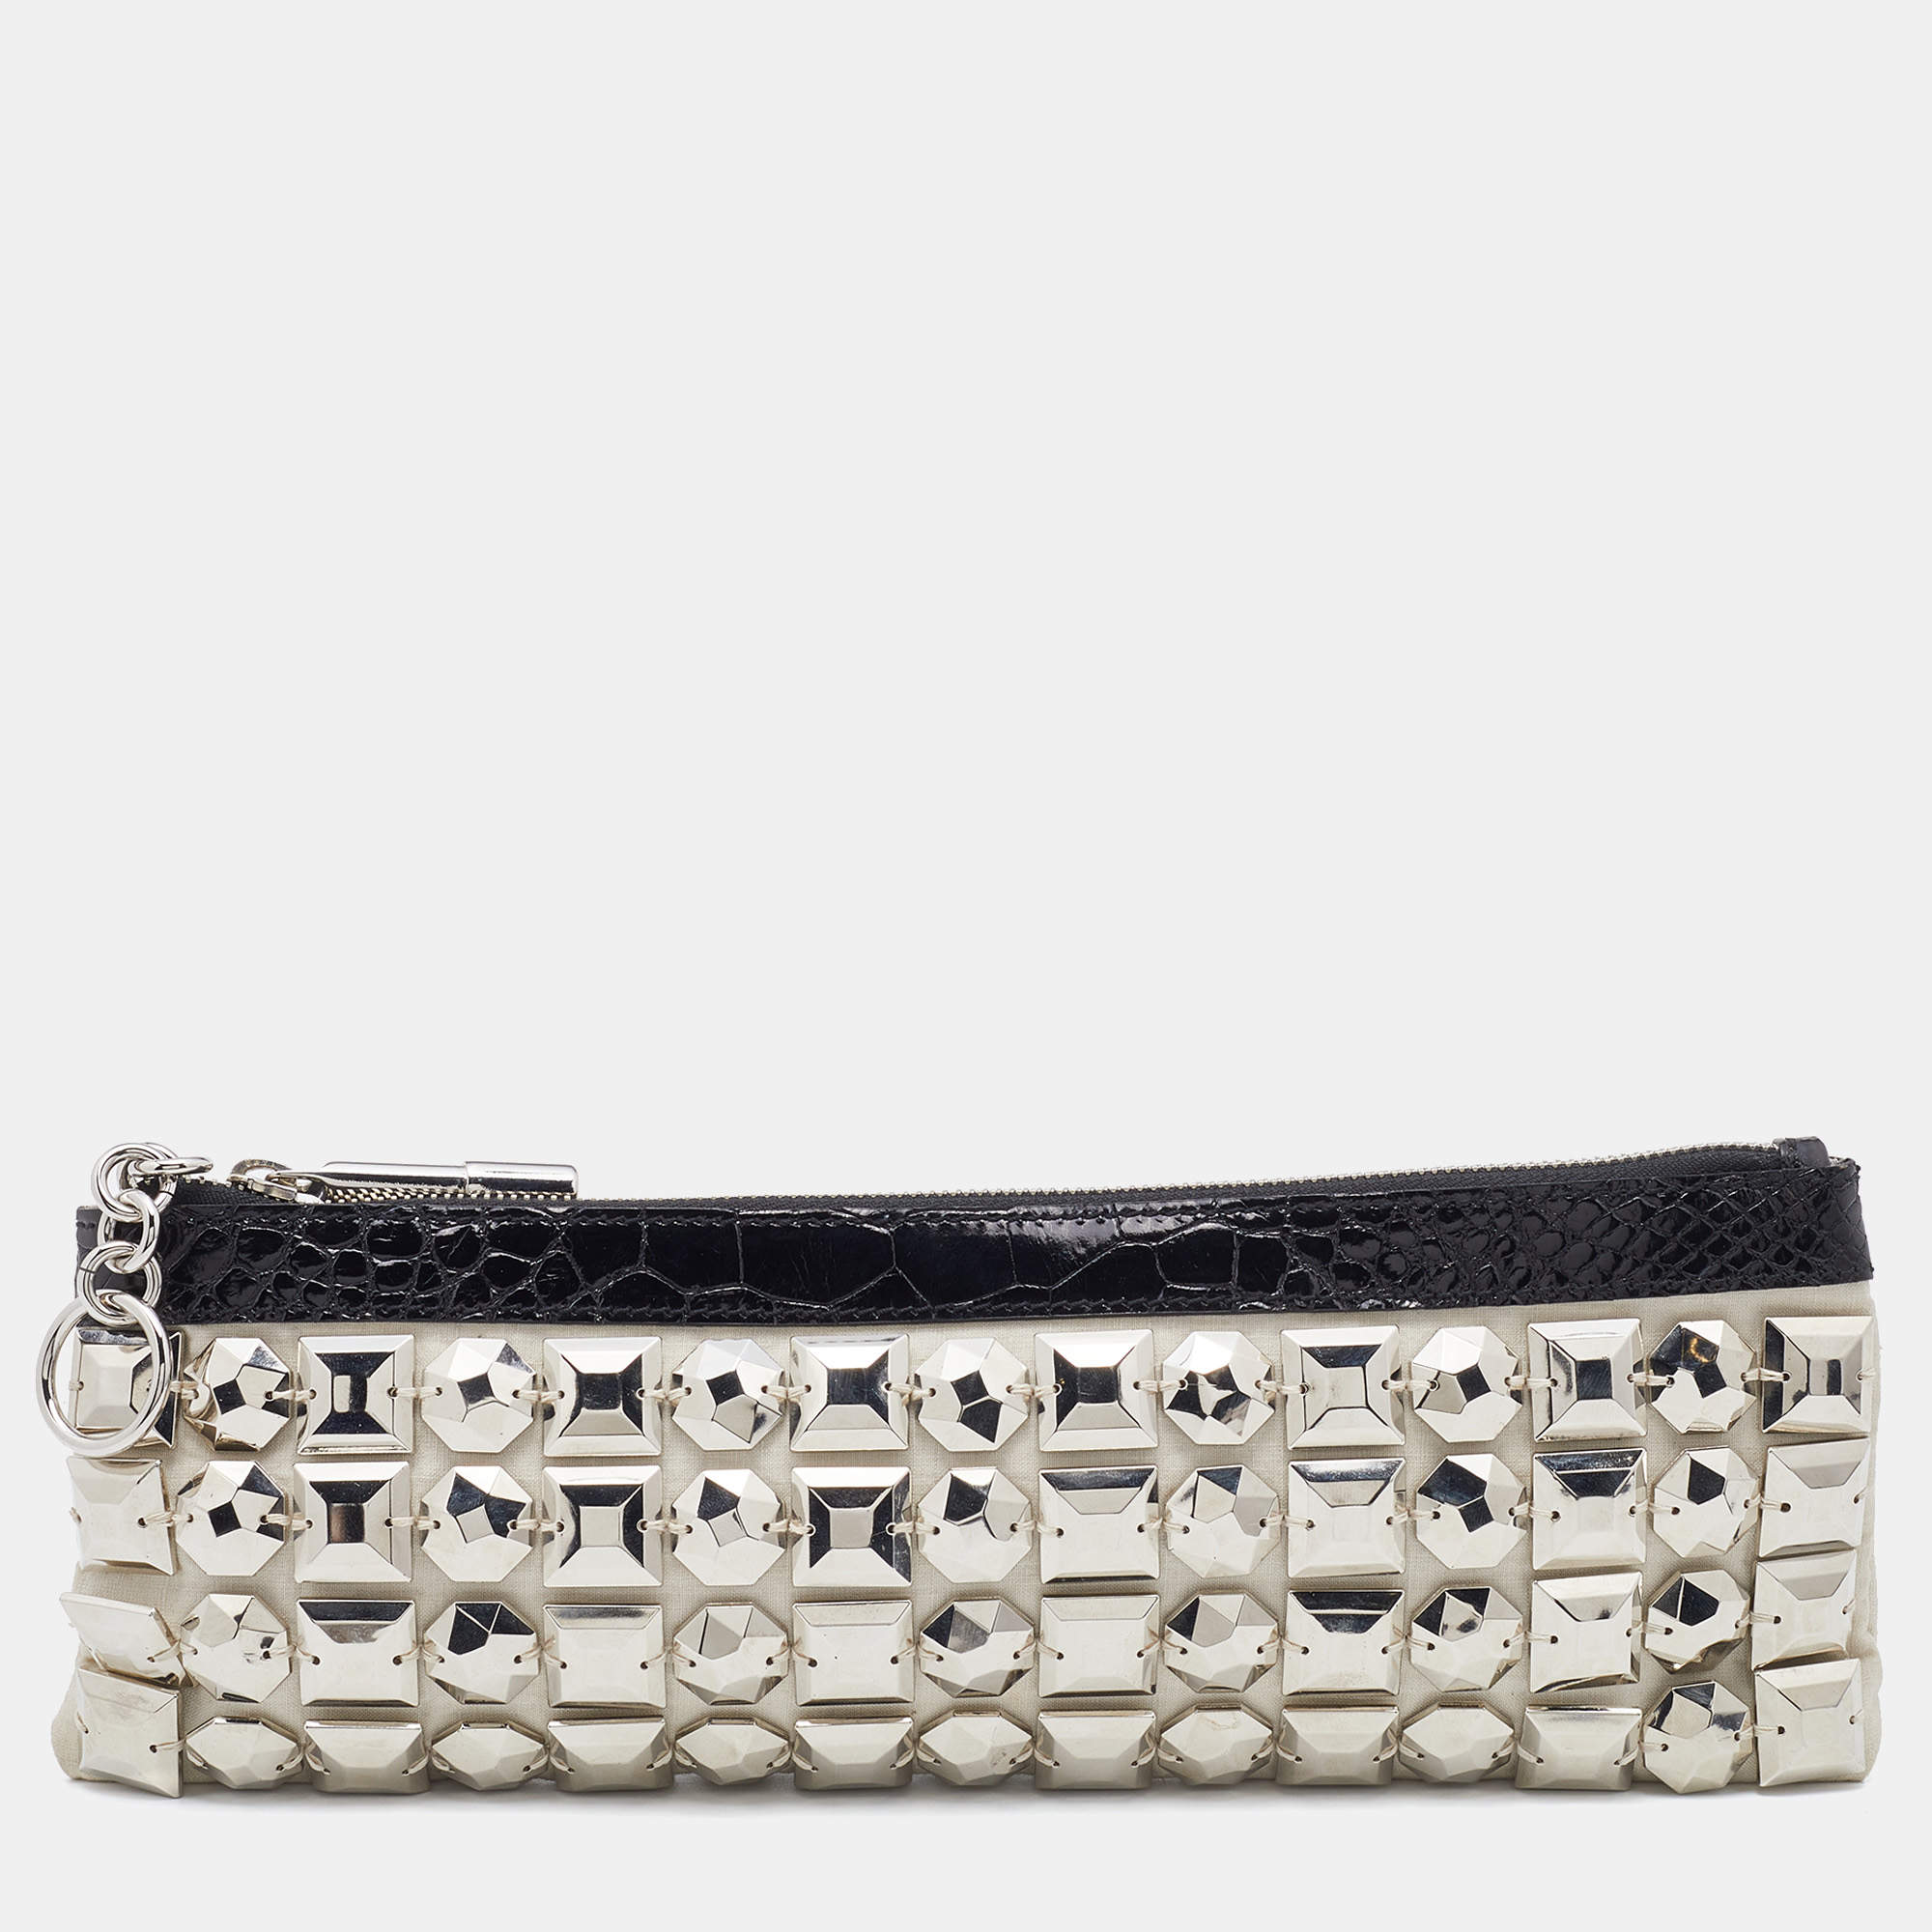 Burberry Off White/Black Fabric and Croc Embossed Patent Leather Embellished Wristlet Clutch